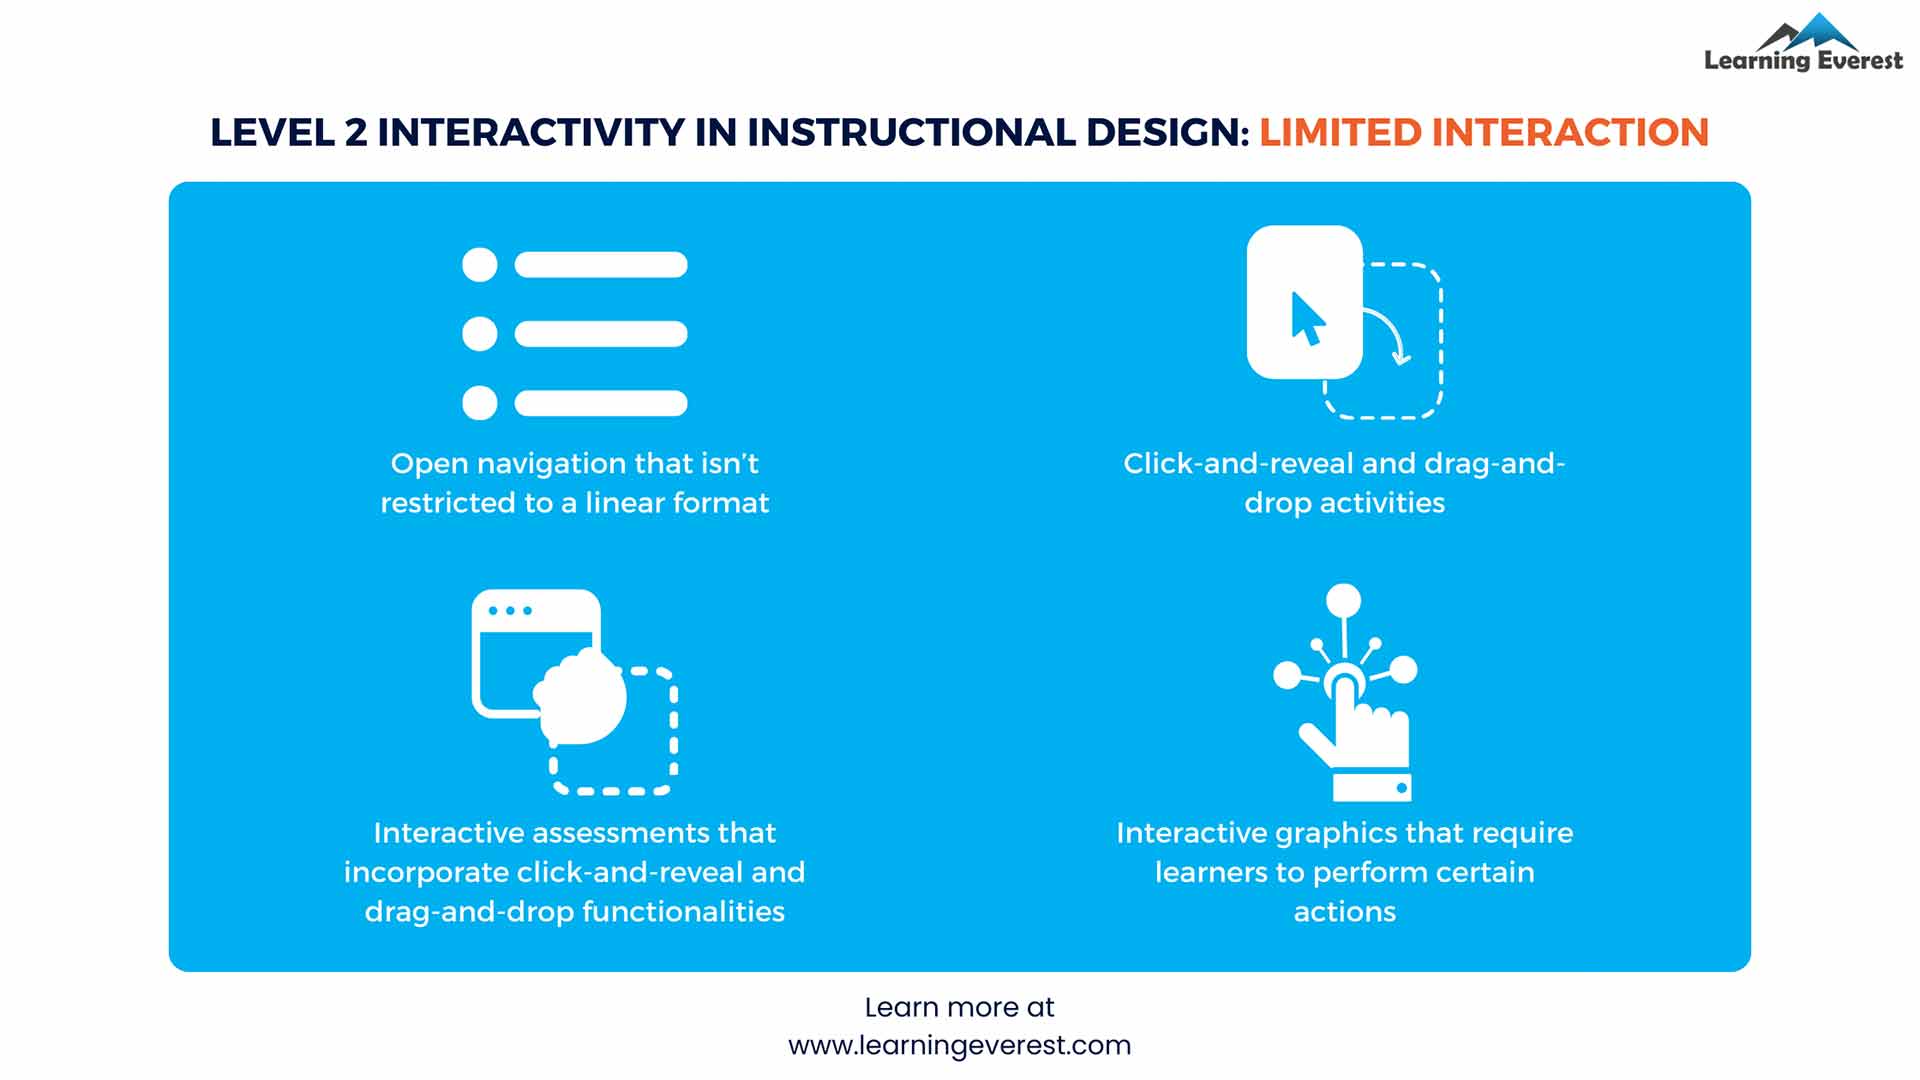 Level 2 Interactivity in Instructional Design - Limited Interaction